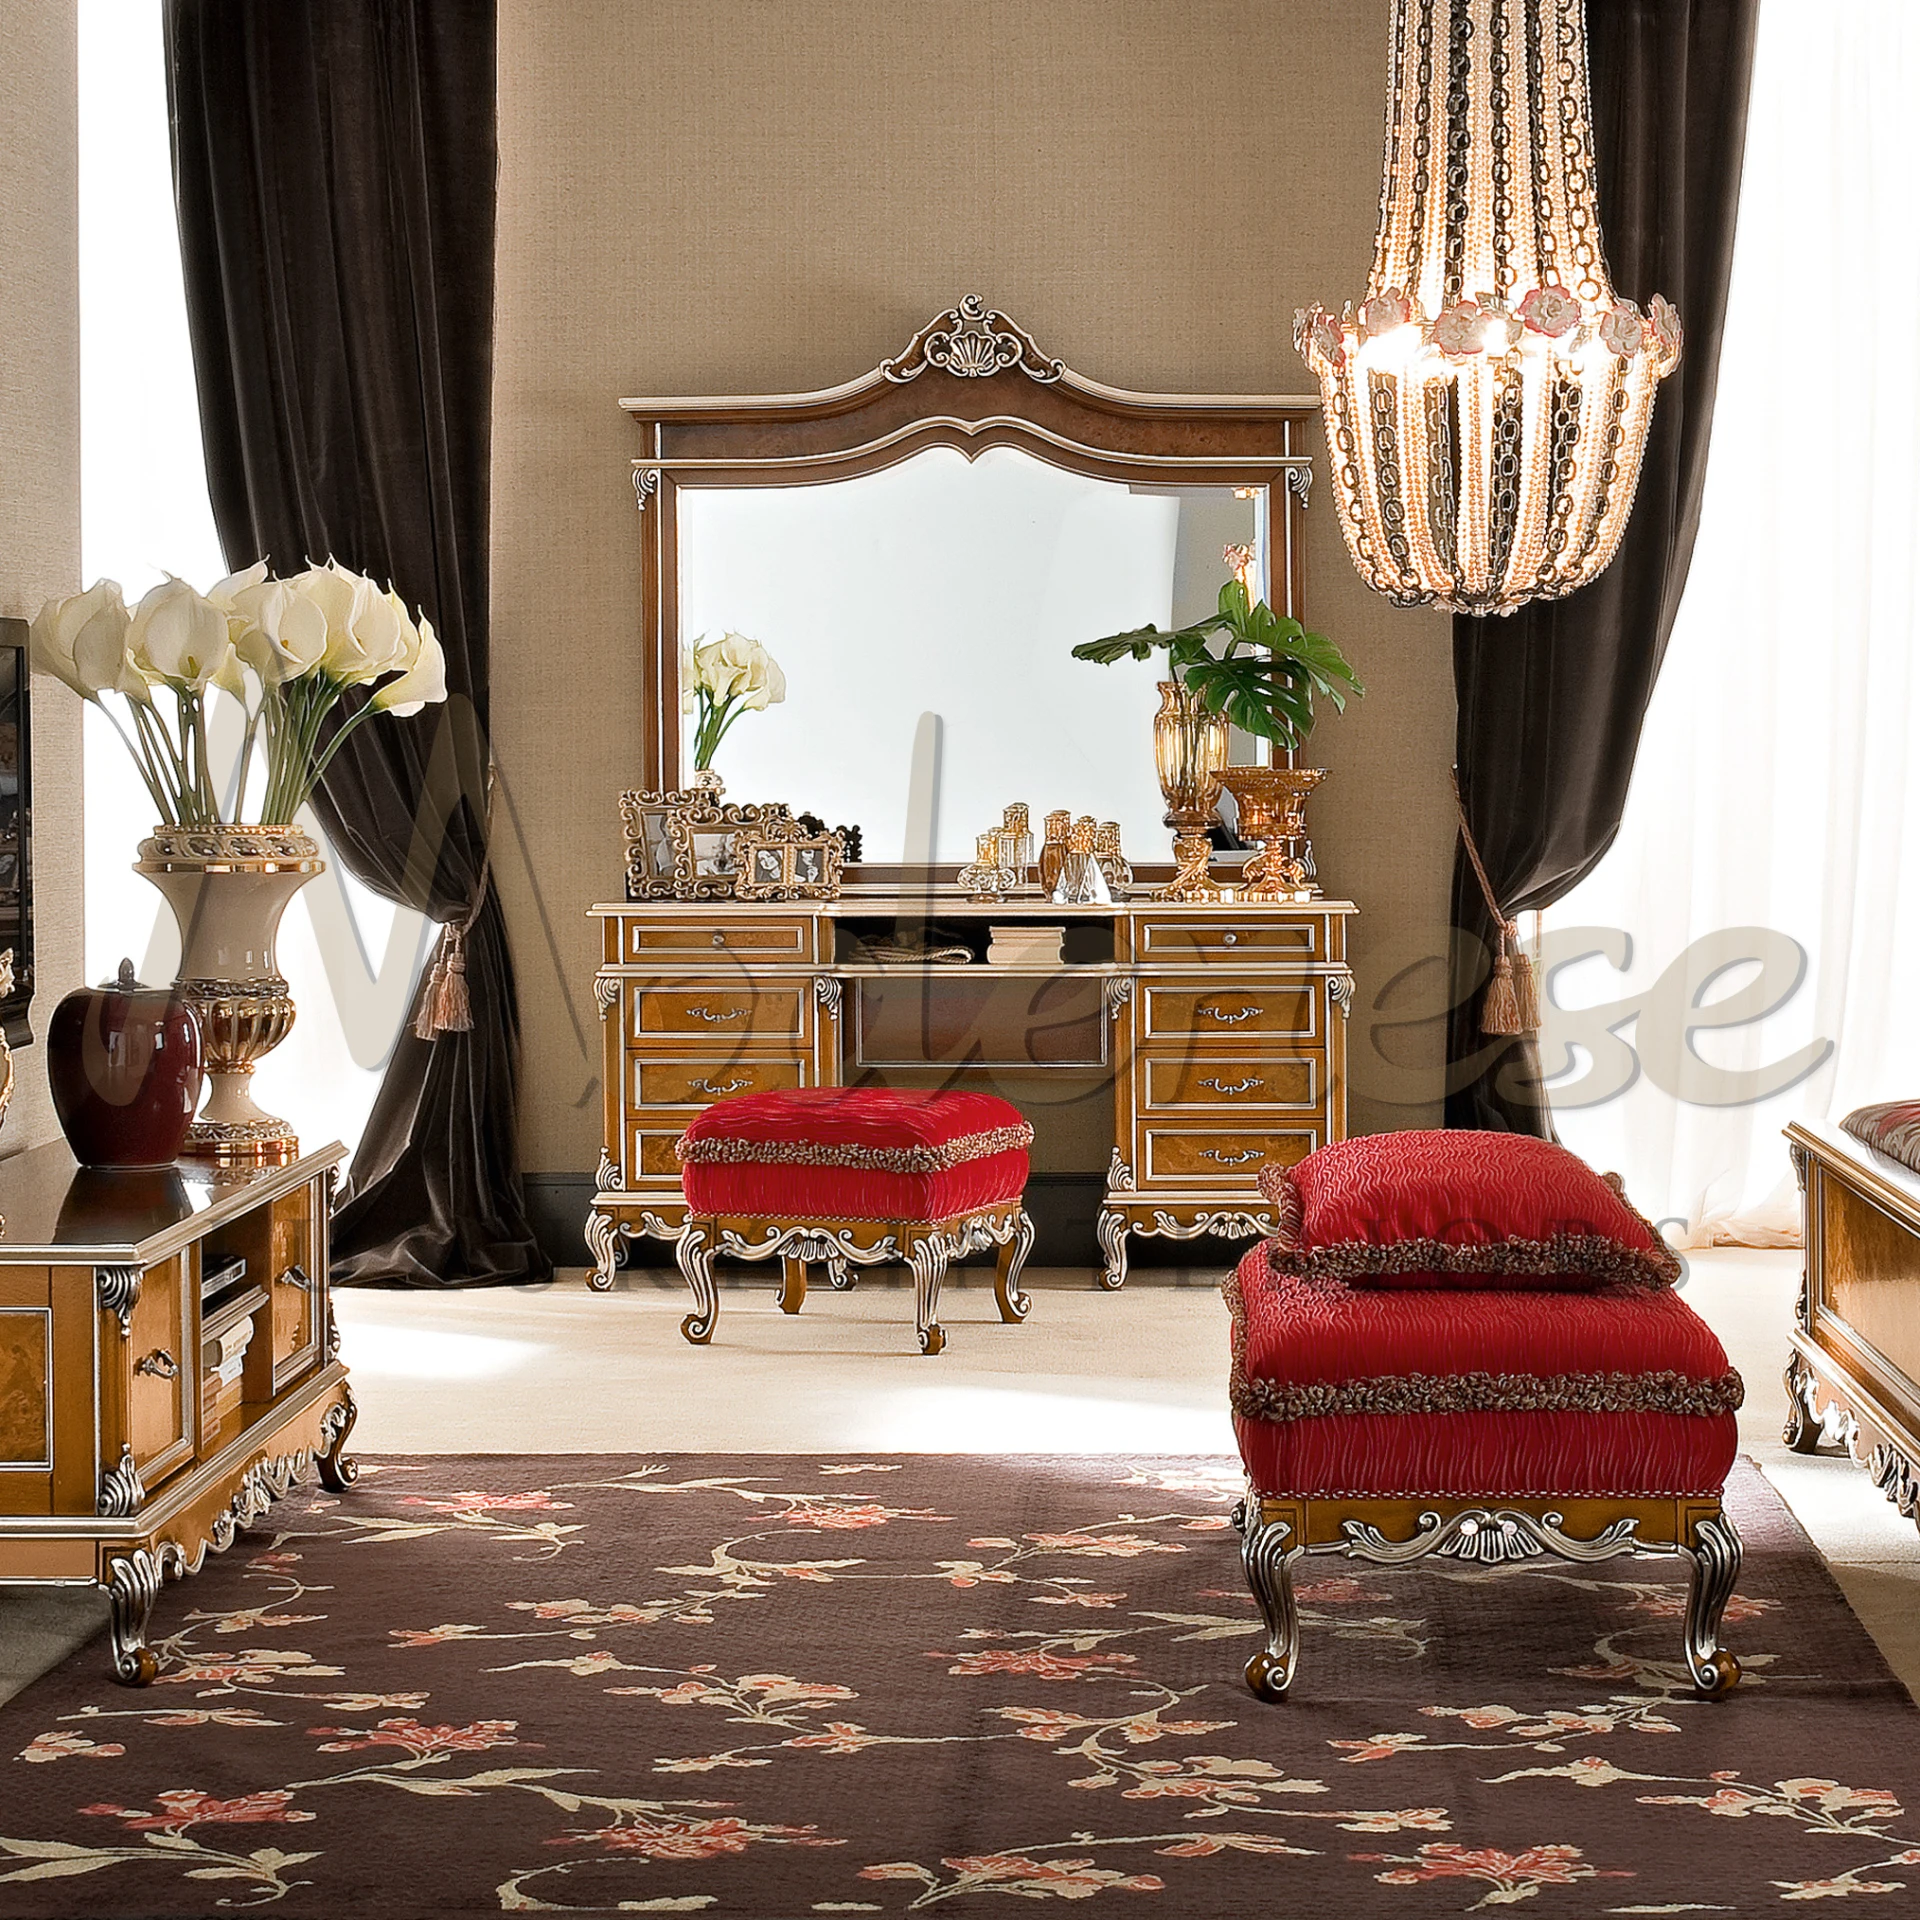 Traditional wooden dressing table with intricate carvings and multiple drawers, paired with a tasseled red stool, adorned with photo frames and perfume bottles.